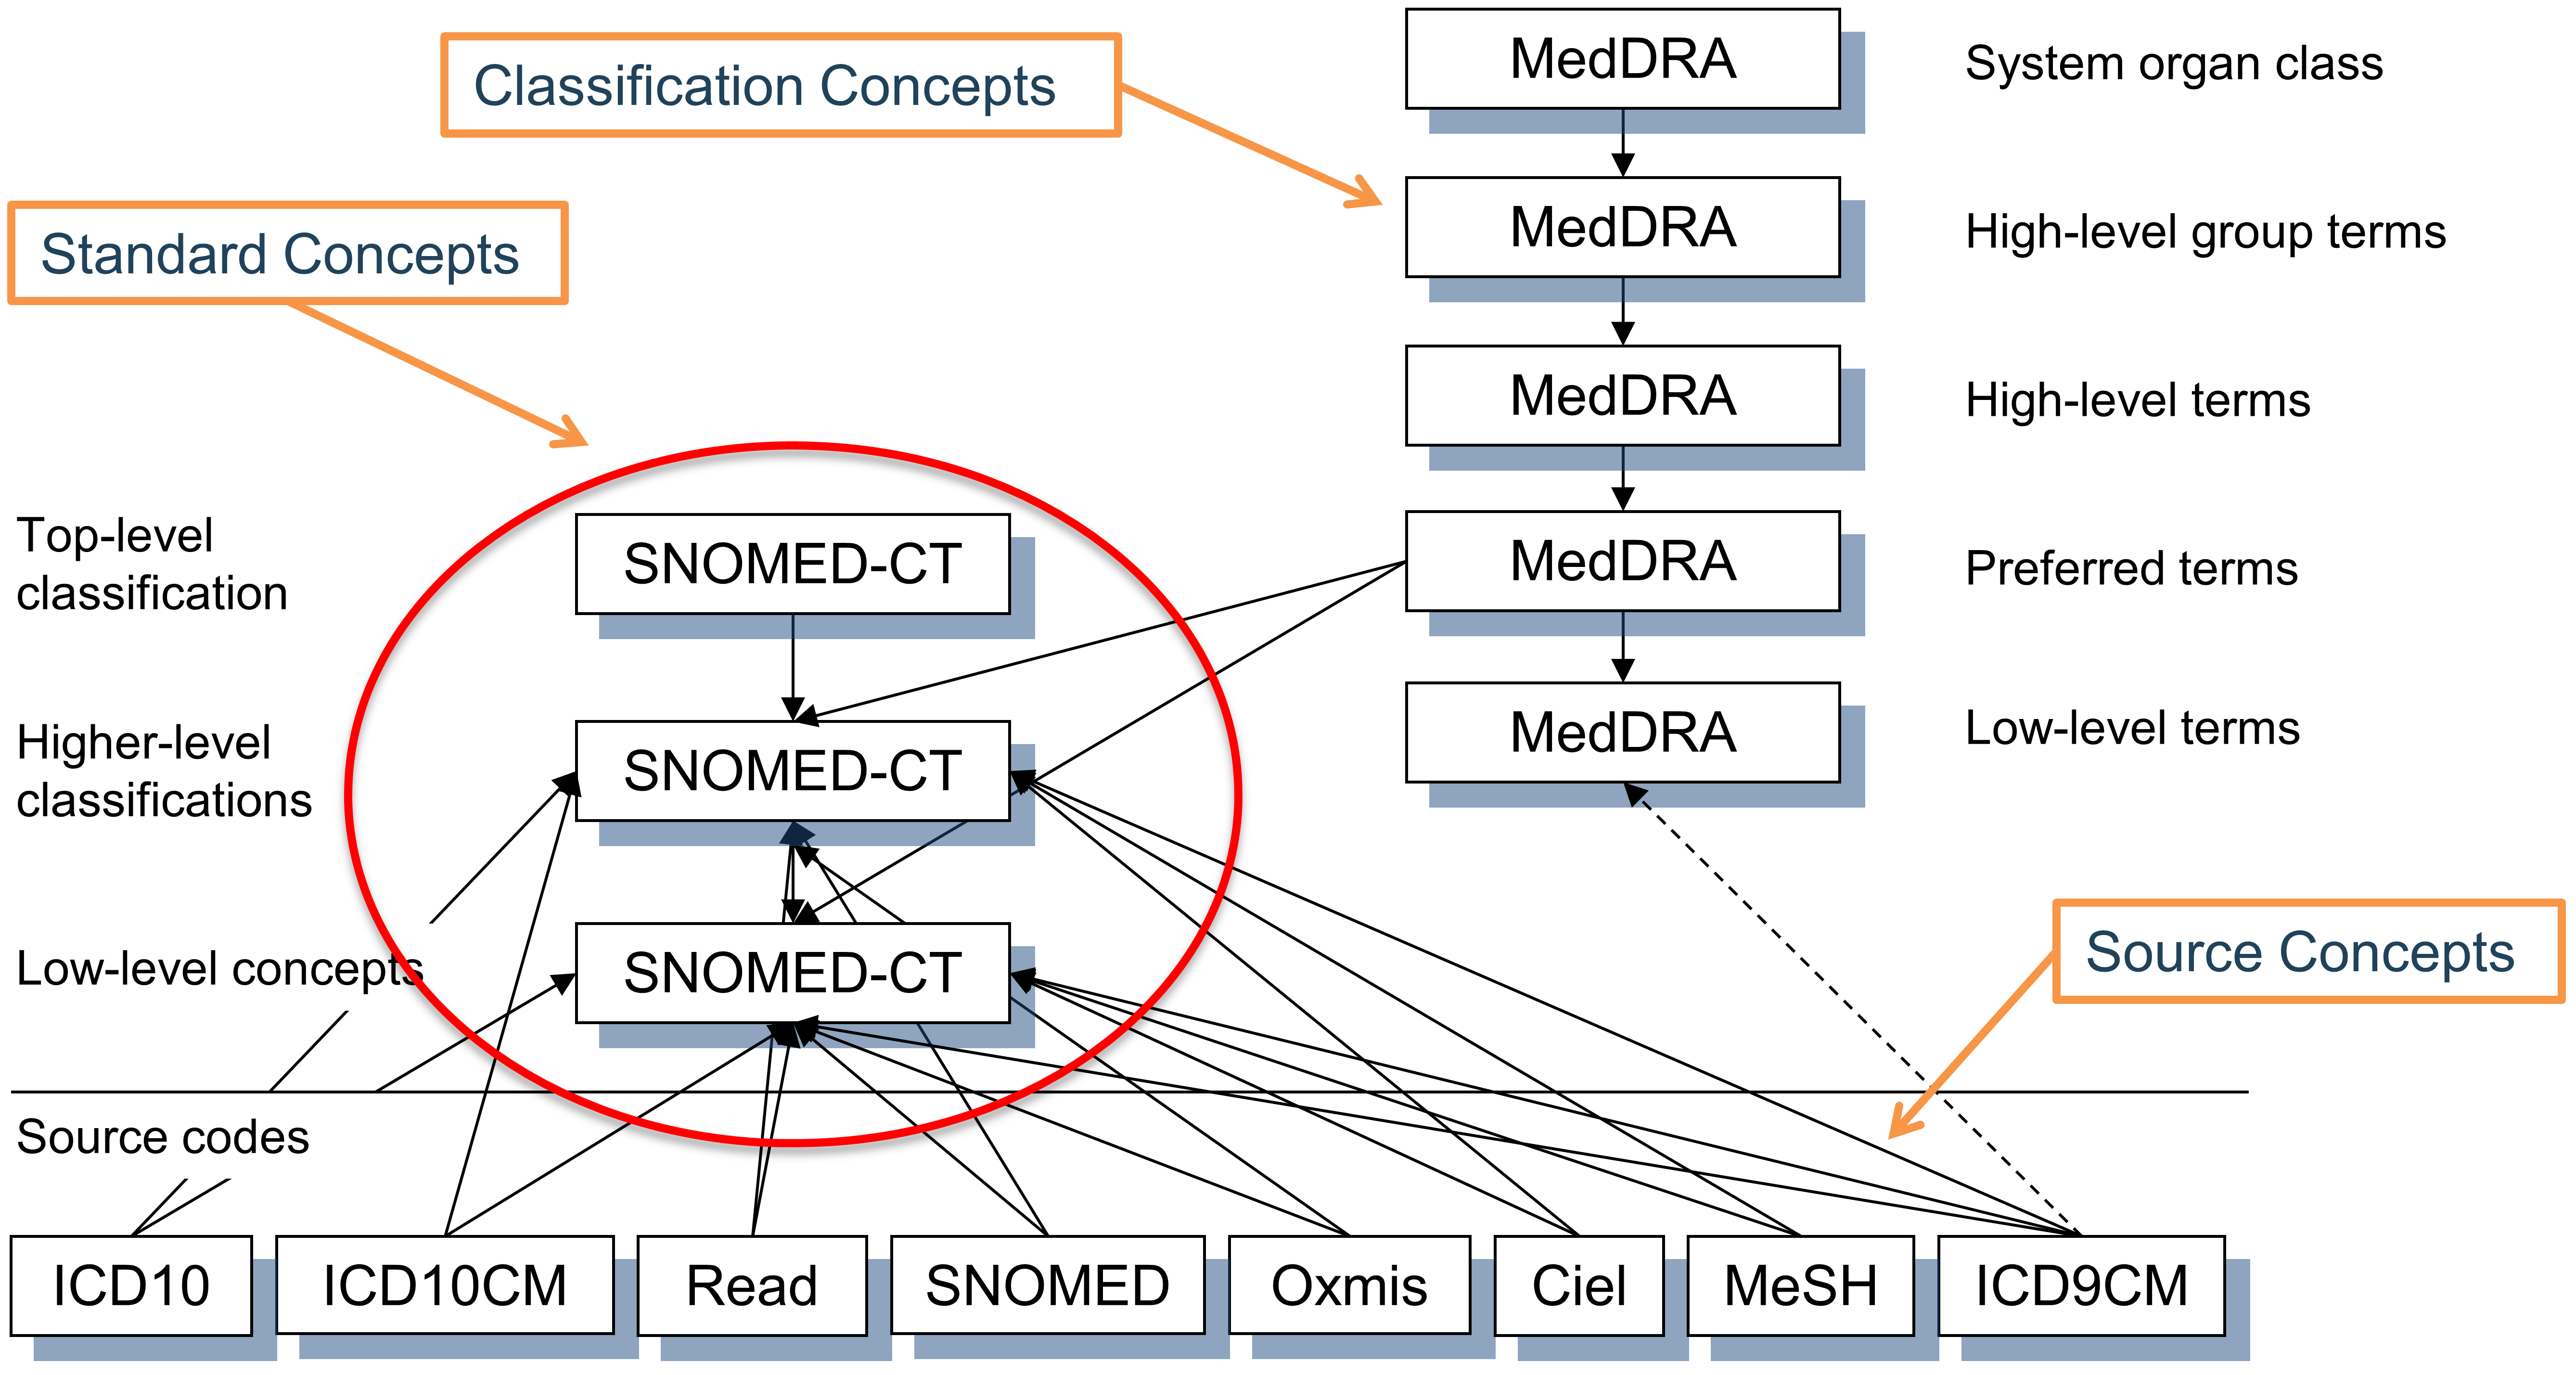 Standard, non-standard source and classification concepts and their hierarchical relationships in the condition domain. SNOMED is used for most standard condition concepts (with some oncology-related concepts derived from ICDO3), MedDRA concepts are used for hierarchical classification concepts, and all other vocabularies contain non-standard or source concepts, which do not participate in the hierarchy.